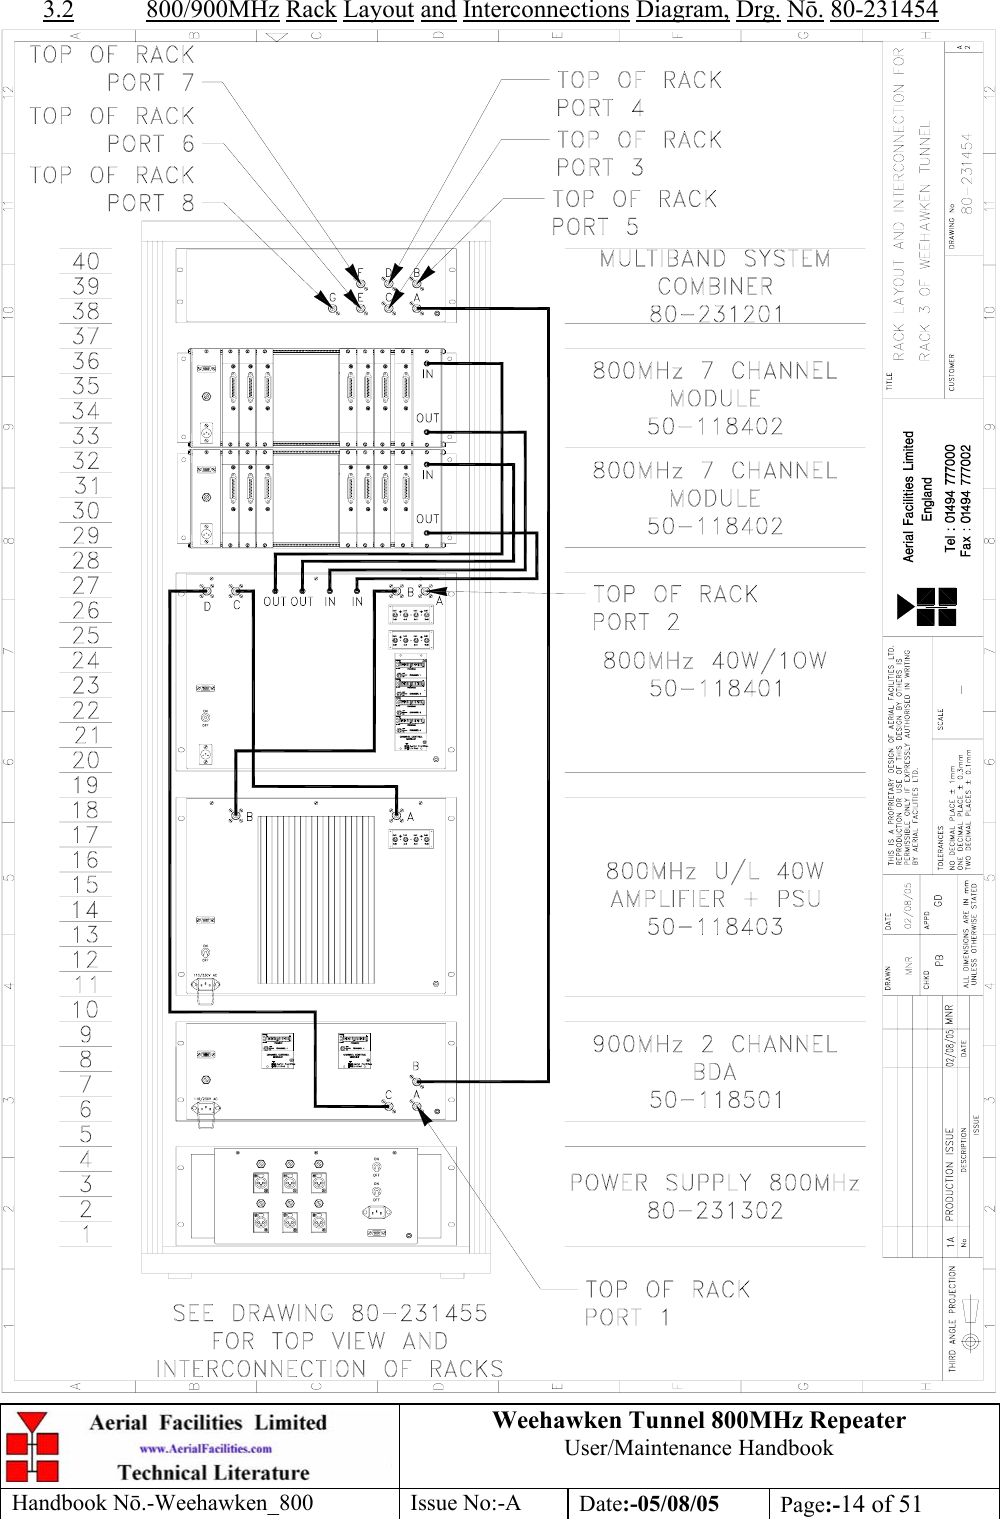 Weehawken Tunnel 800MHz Repeater User/Maintenance Handbook Handbook N.-Weehawken_800 Issue No:-A Date:-05/08/05  Page:-14 of 51  3.2 800/900MHz Rack Layout and Interconnections Diagram, Drg. N. 80-231454  